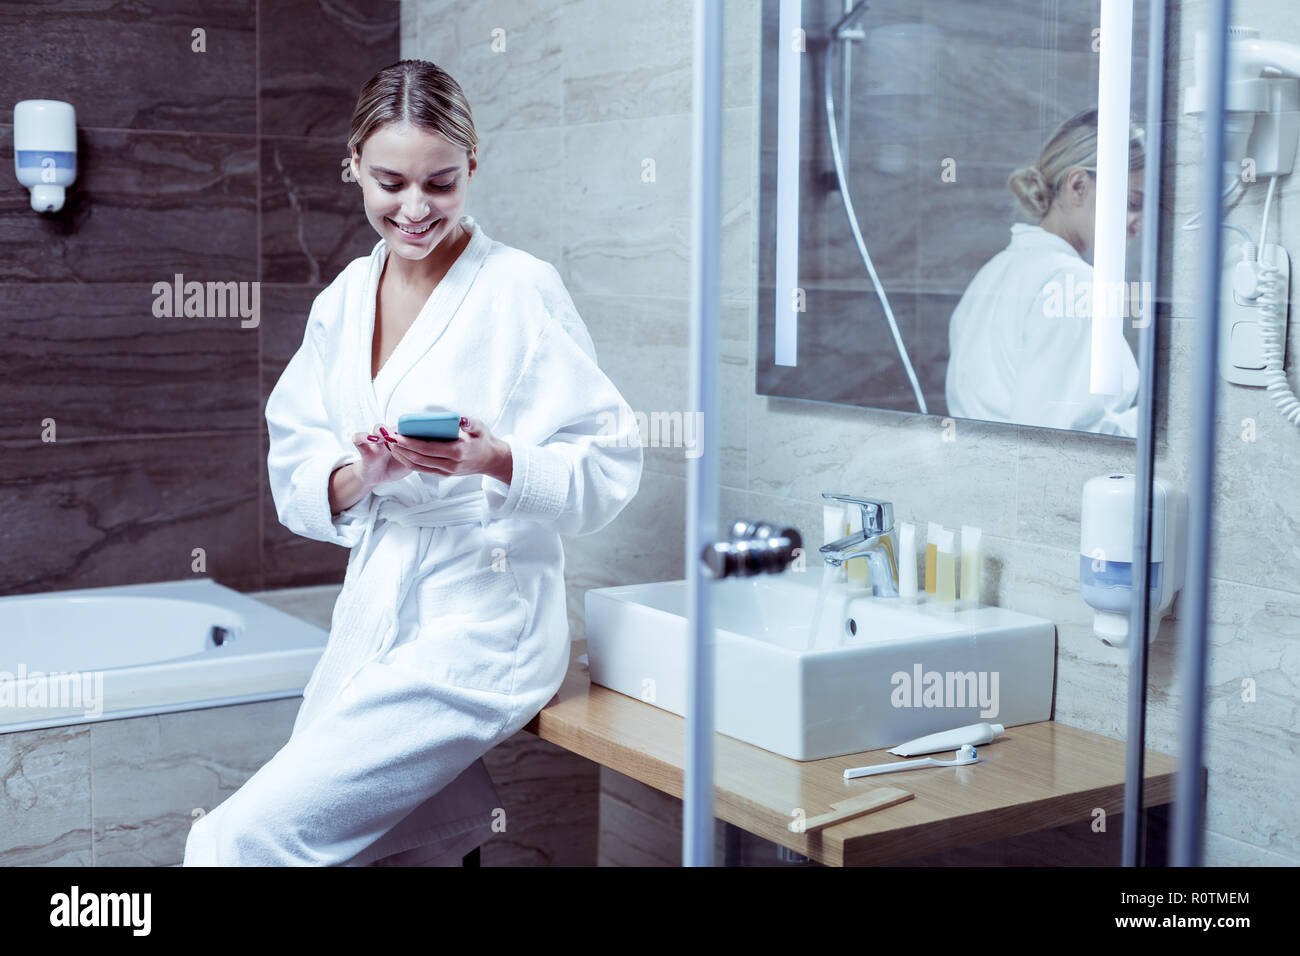 Blonde-haired woman reading message on phone standing in bathroom Stock Photo